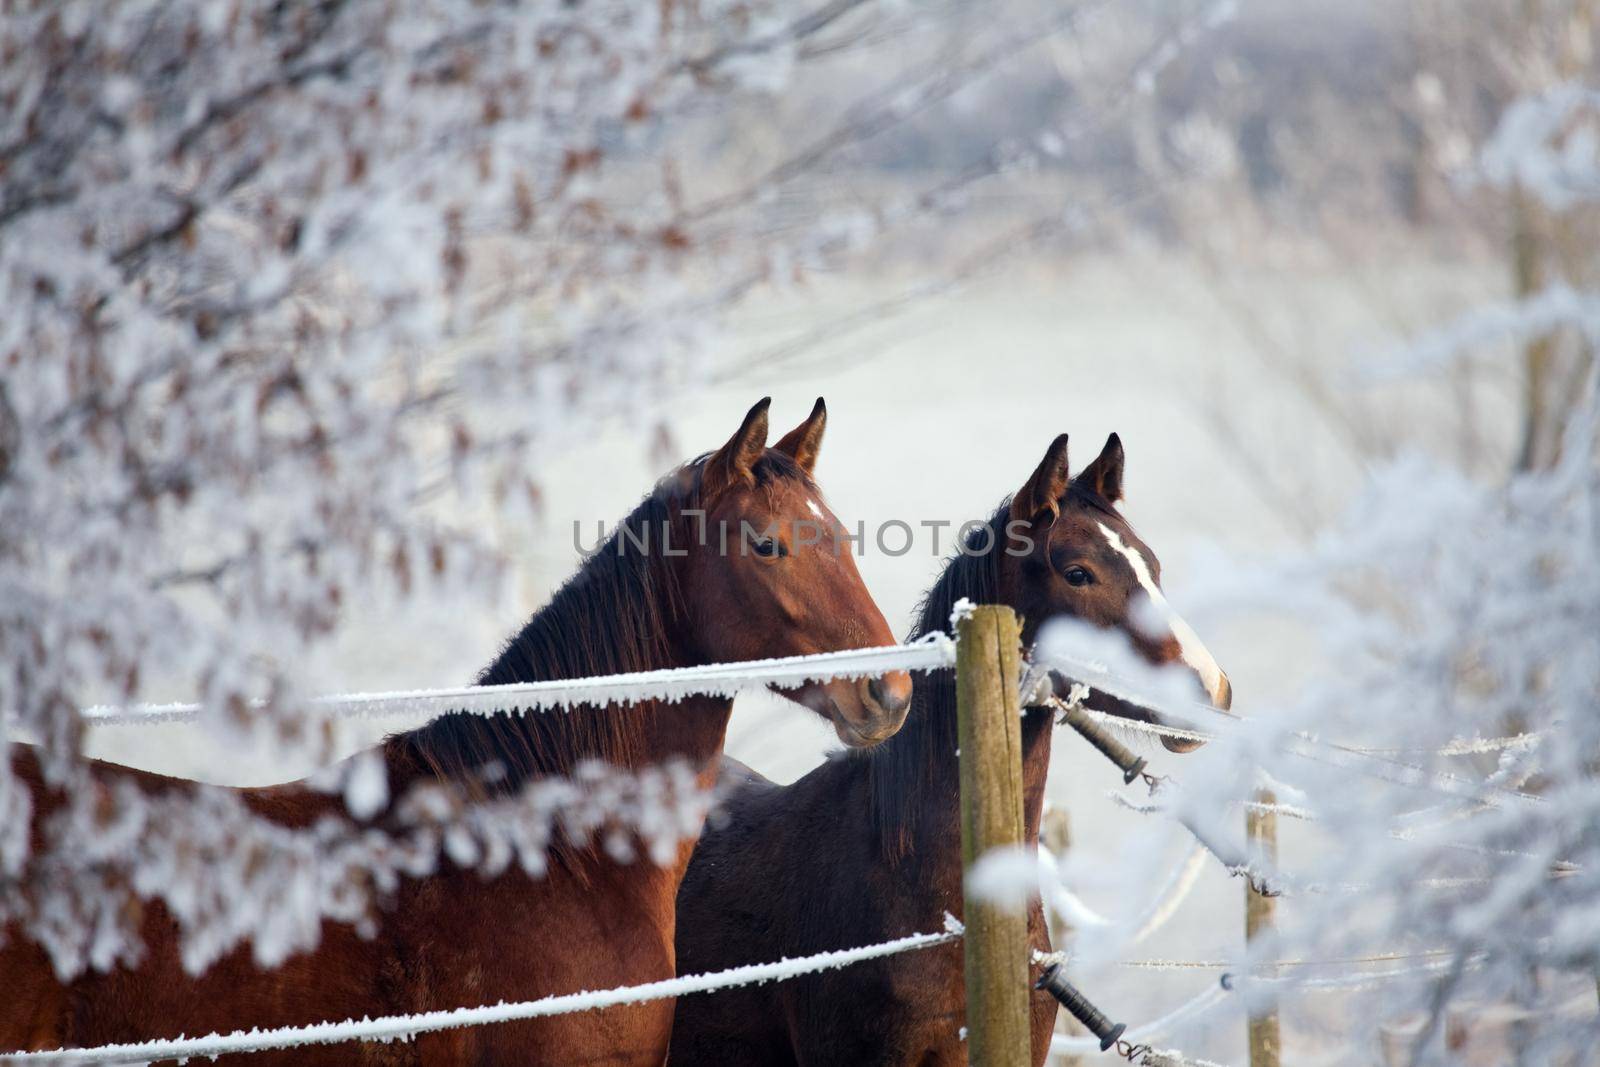 Two horses in a winter landscape, looking over a fence